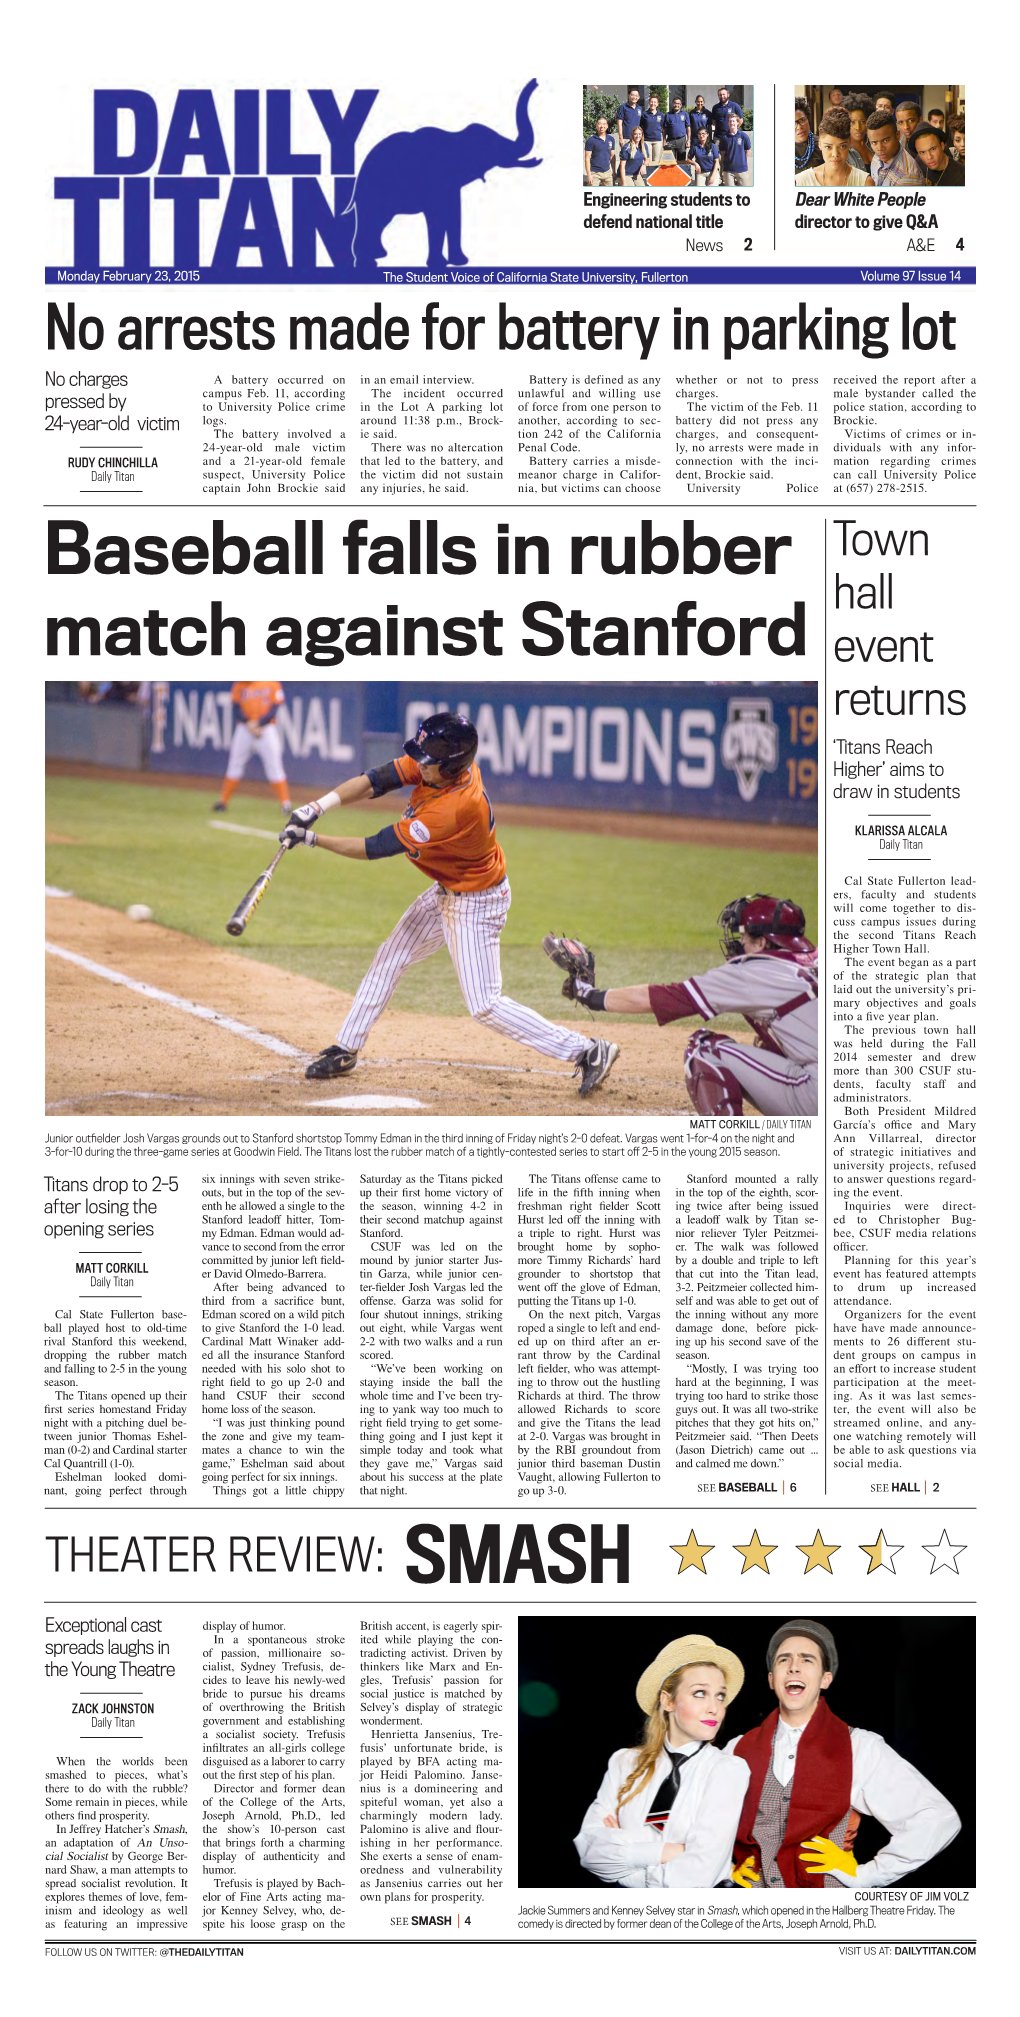 Baseball Falls in Rubber Match Against Stanford